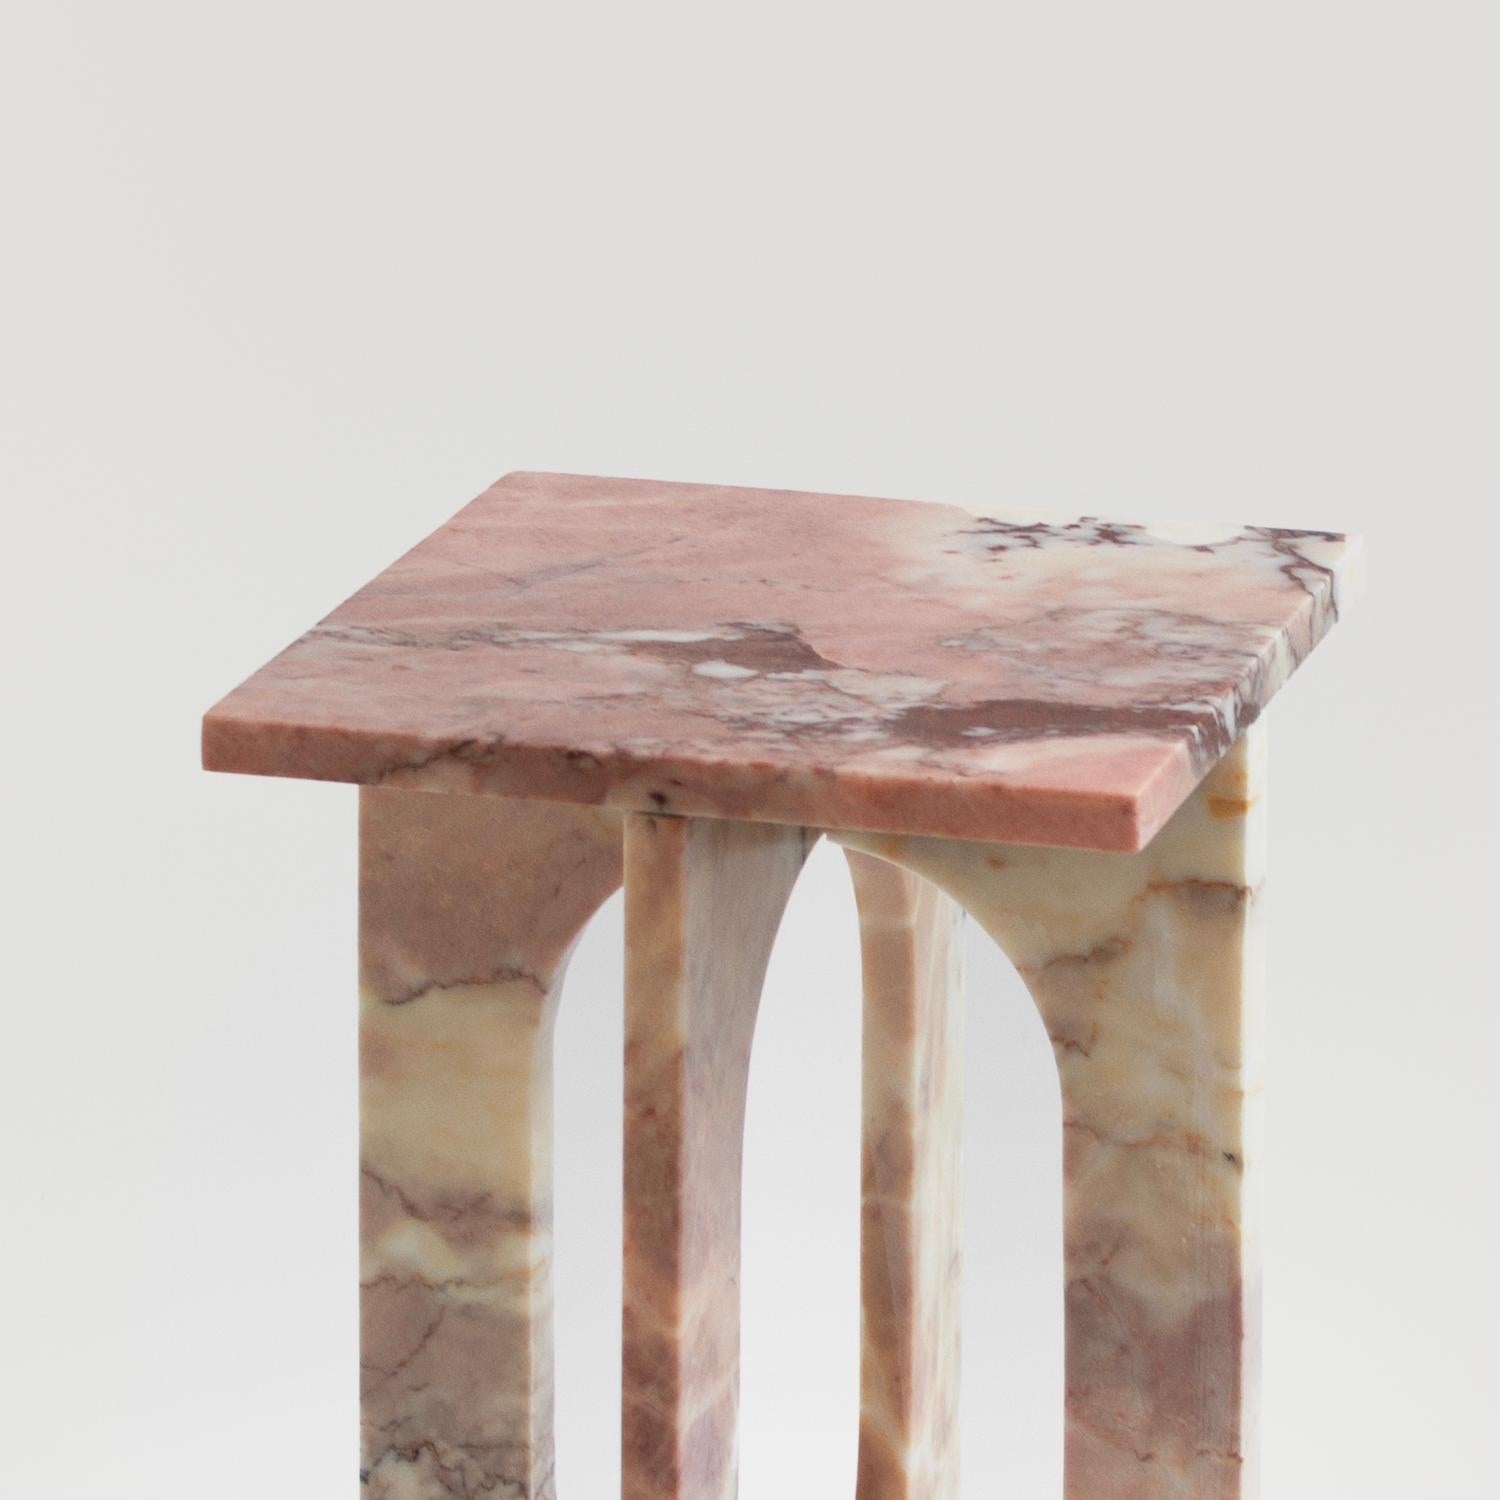 BOND Side Table in Pink marble -  Bond Side Table evokes simplicity with its modern, clean design. Crafted from honed marble, this piece is a stylish addition to any space with its sophisticated, clean lines and sleek construction. Use Bond as a